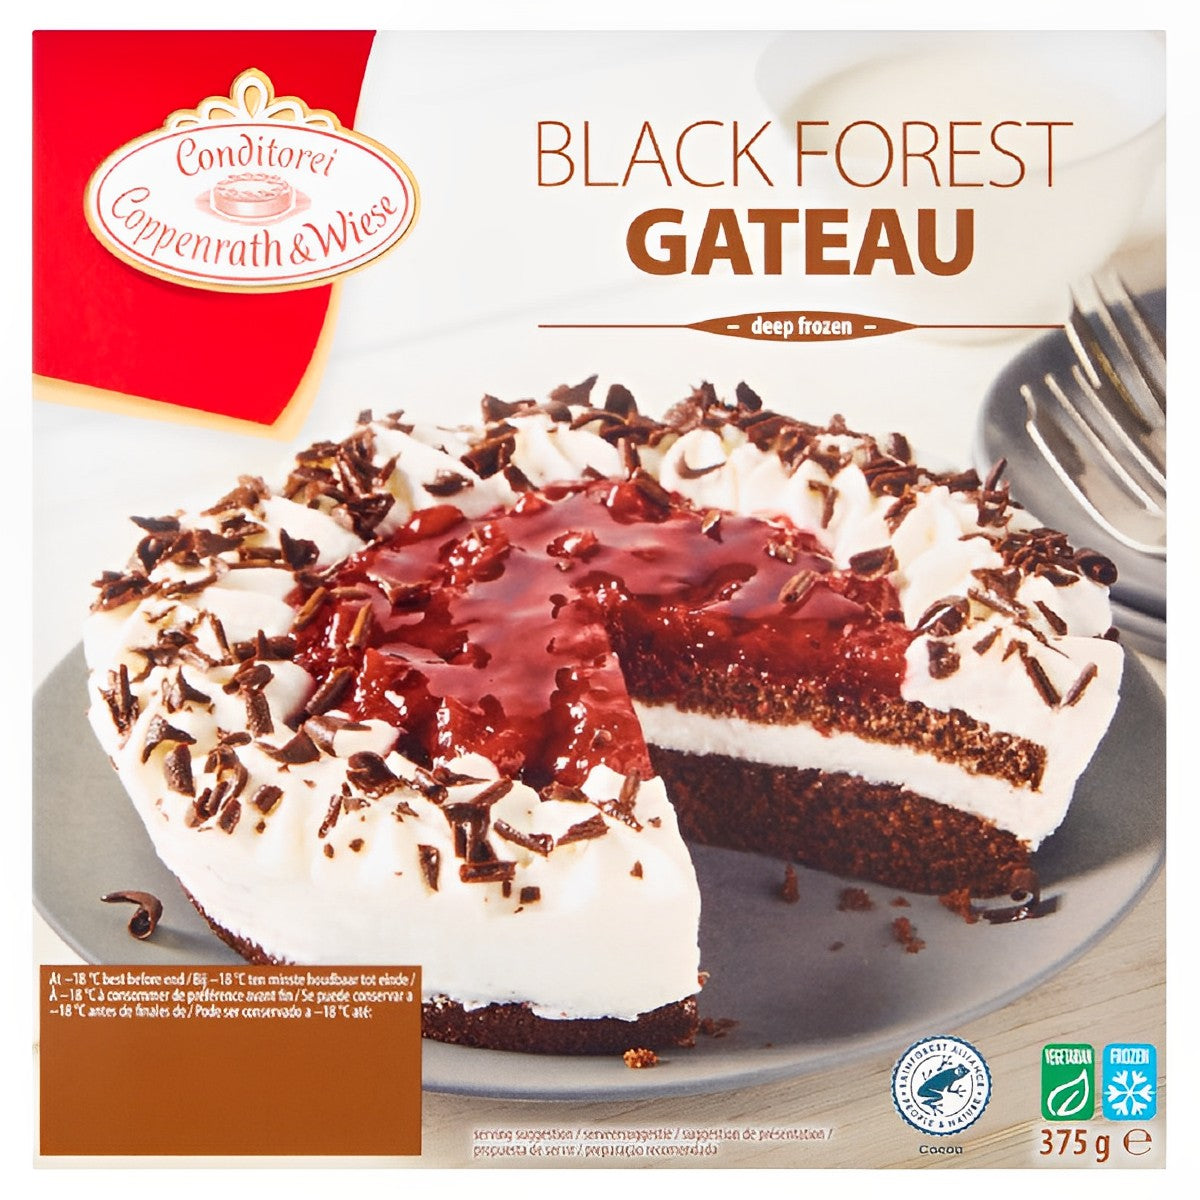 Conditorei Coppenrath & Wiese -  Black Forest Gateau - 375g - Continental Food Store